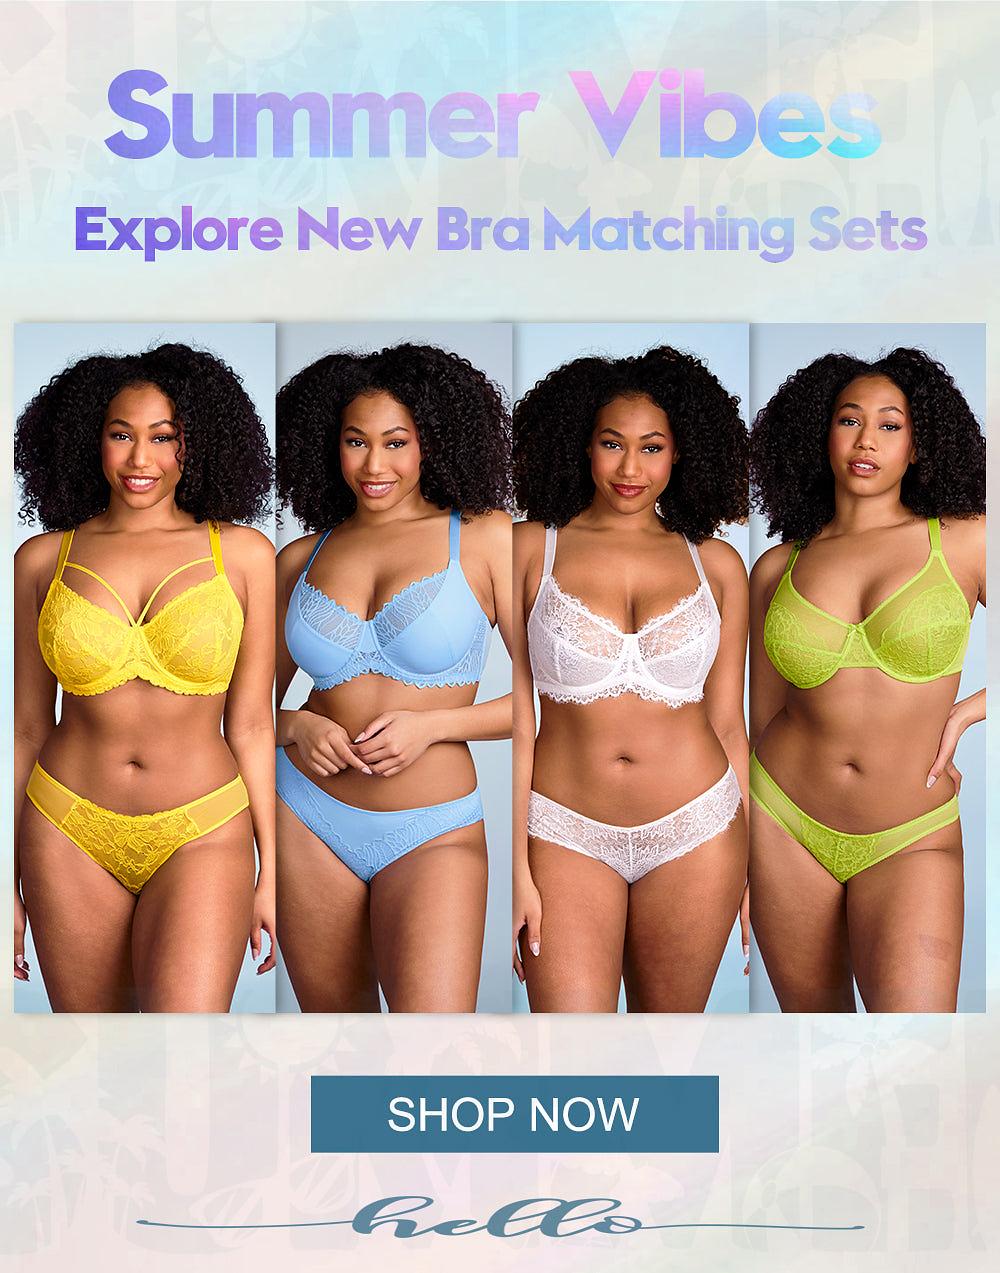 Types of Bra Cups - Explore Must Have Bra Cup Styles